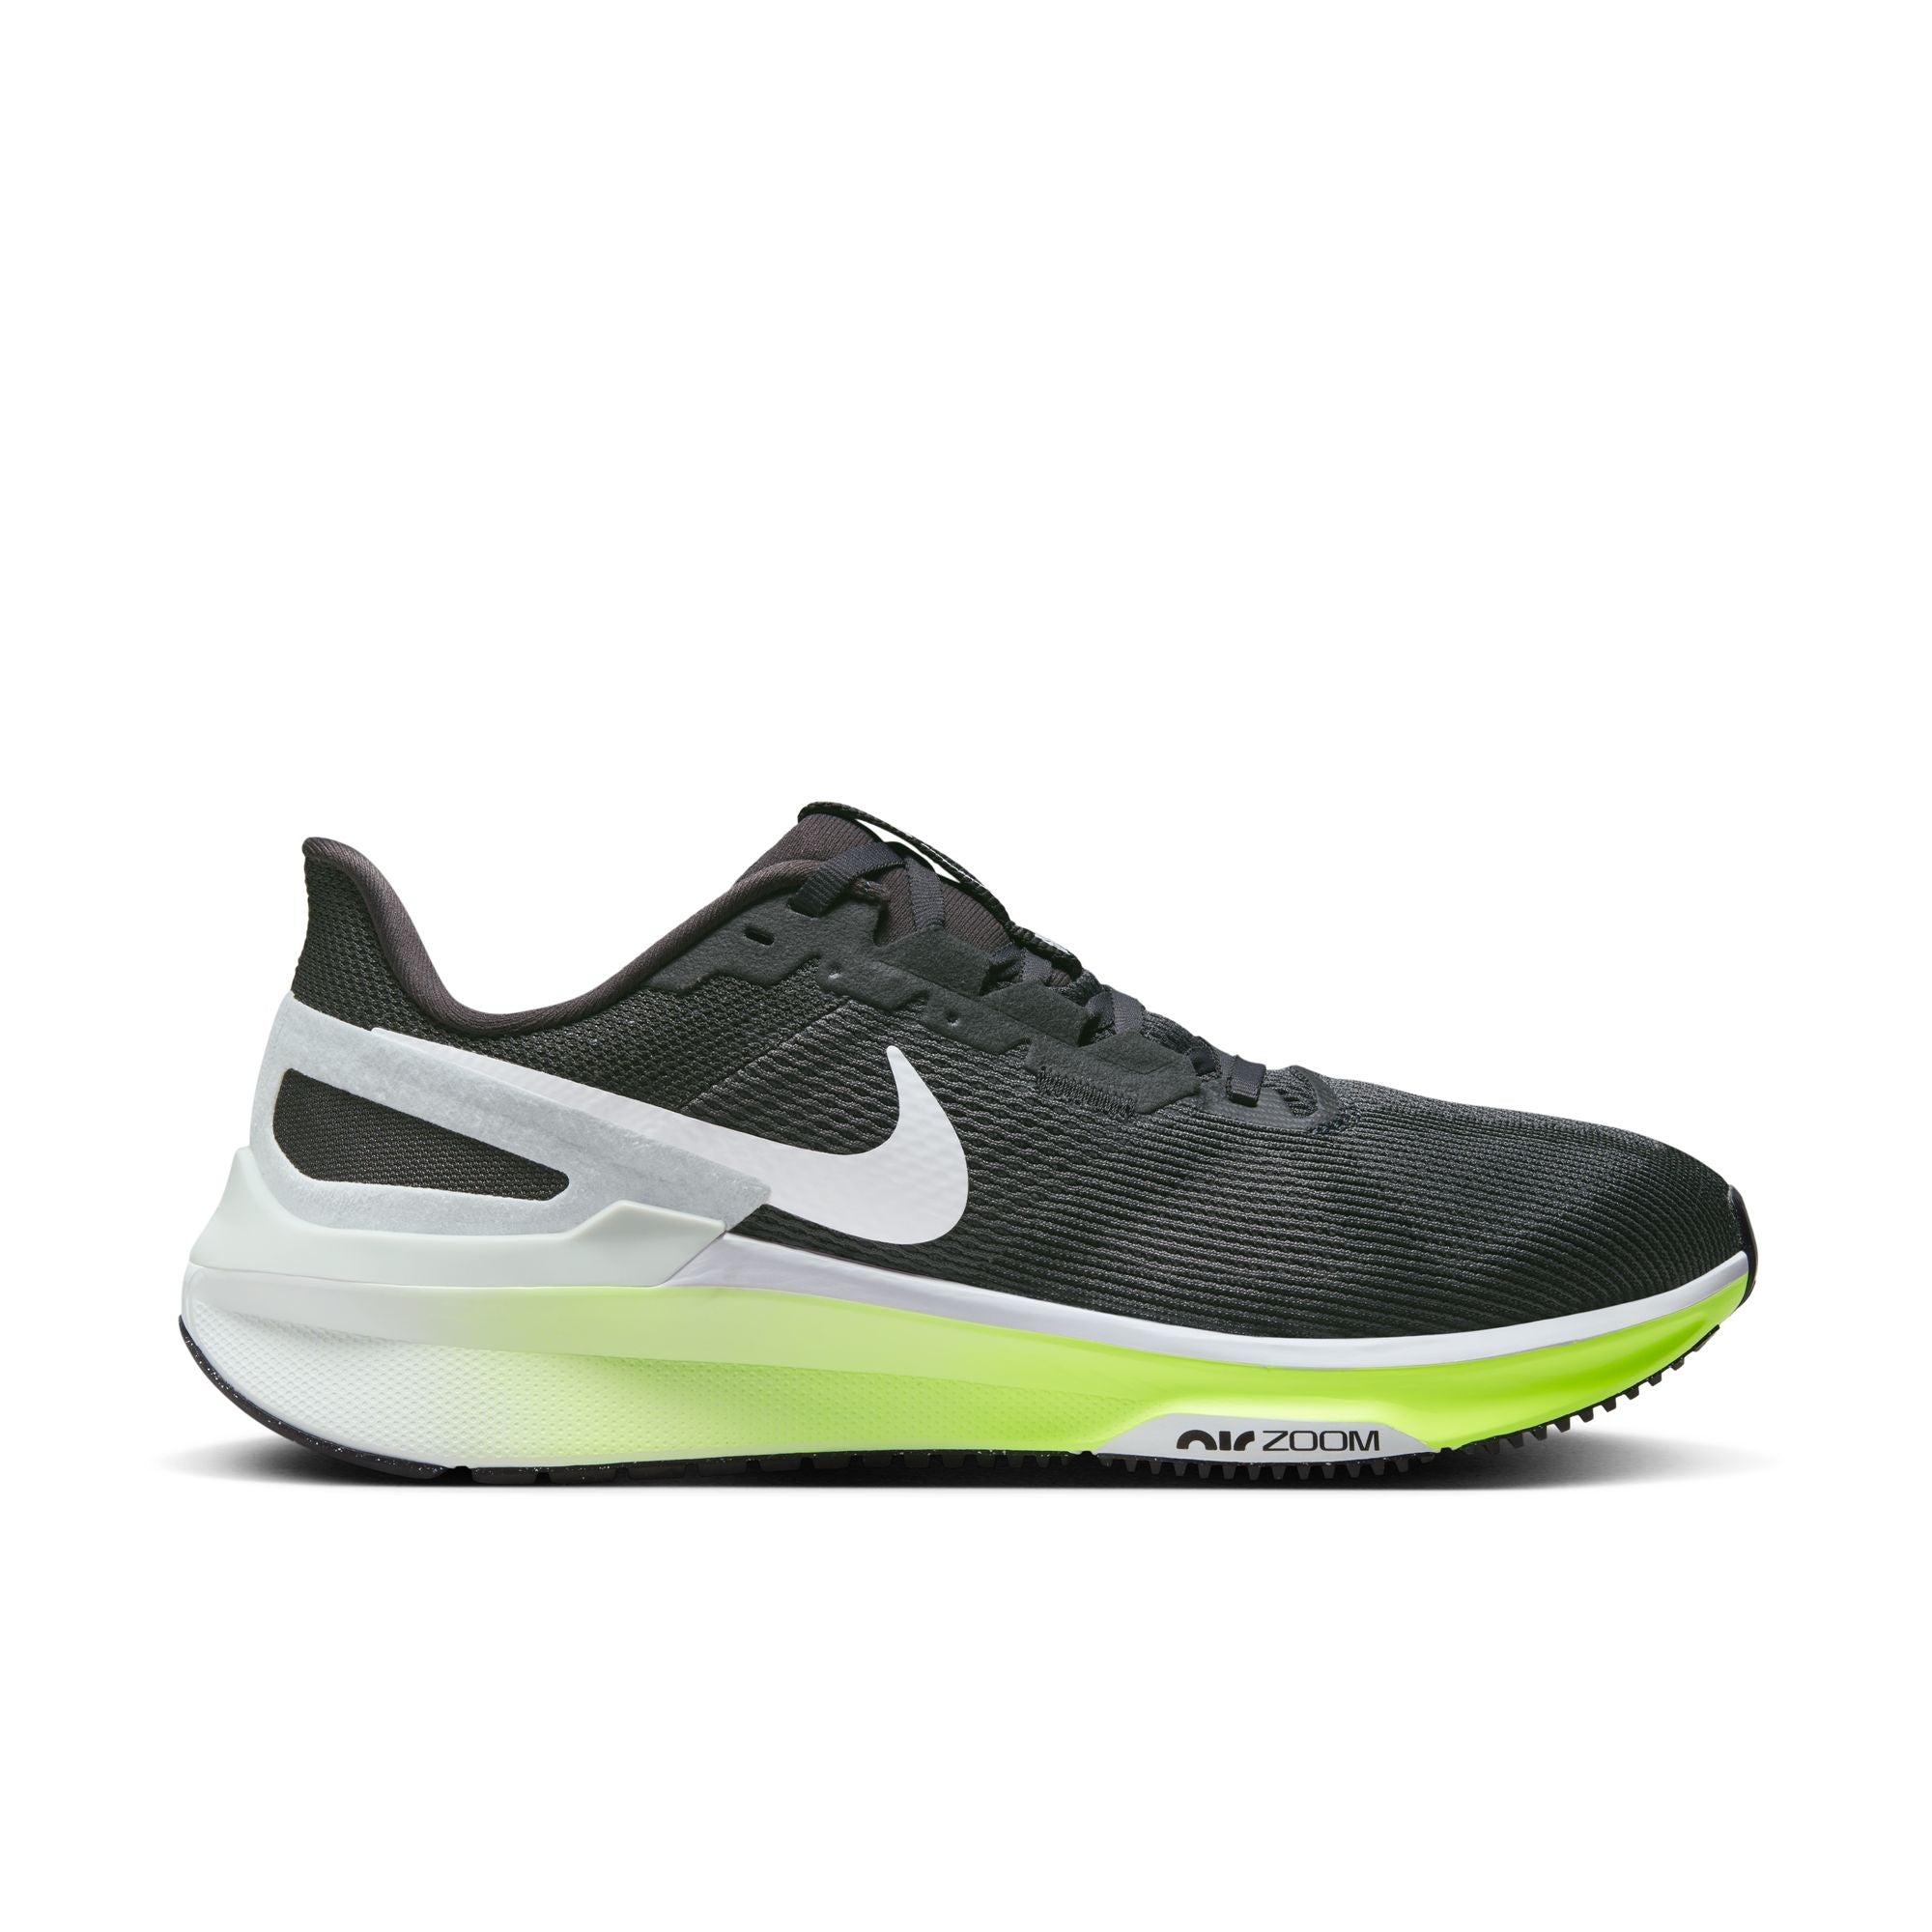 NIKE MEN'S STRUCTURE 25 - D - 005 ANTHRACITE 5.0